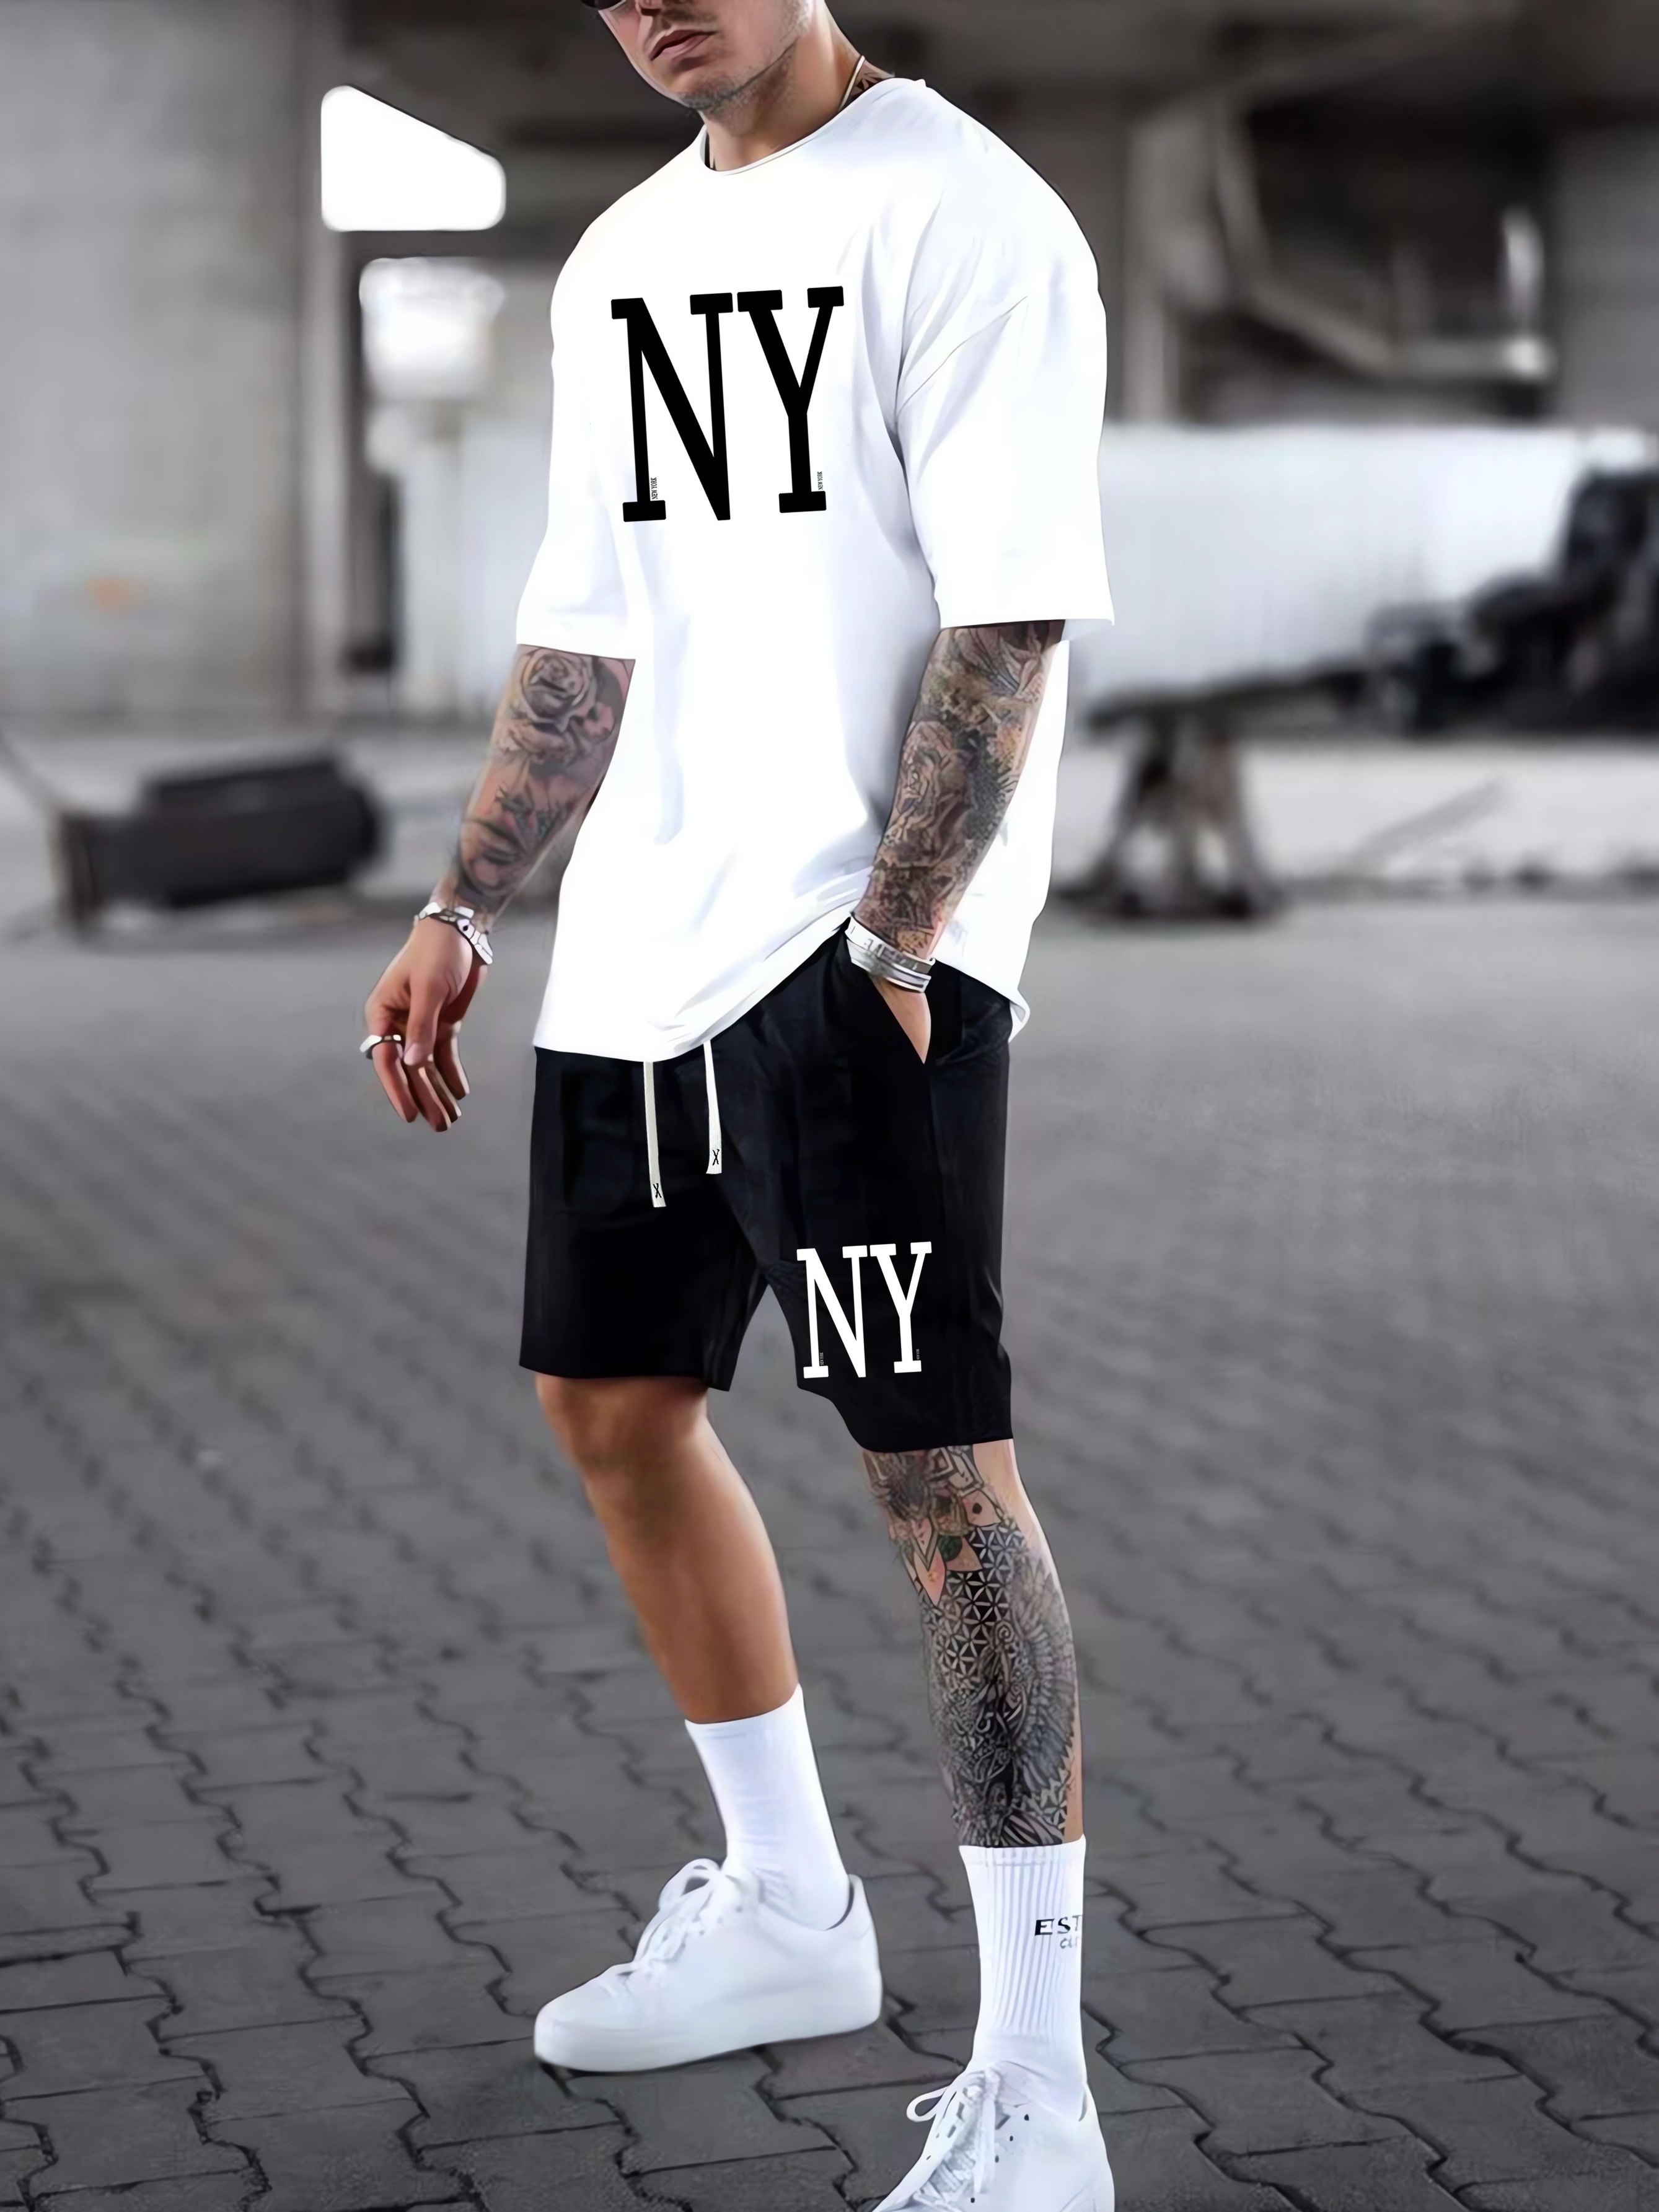 Ny'' Print, Street Style Men's, Trendy T-shirt And Loose